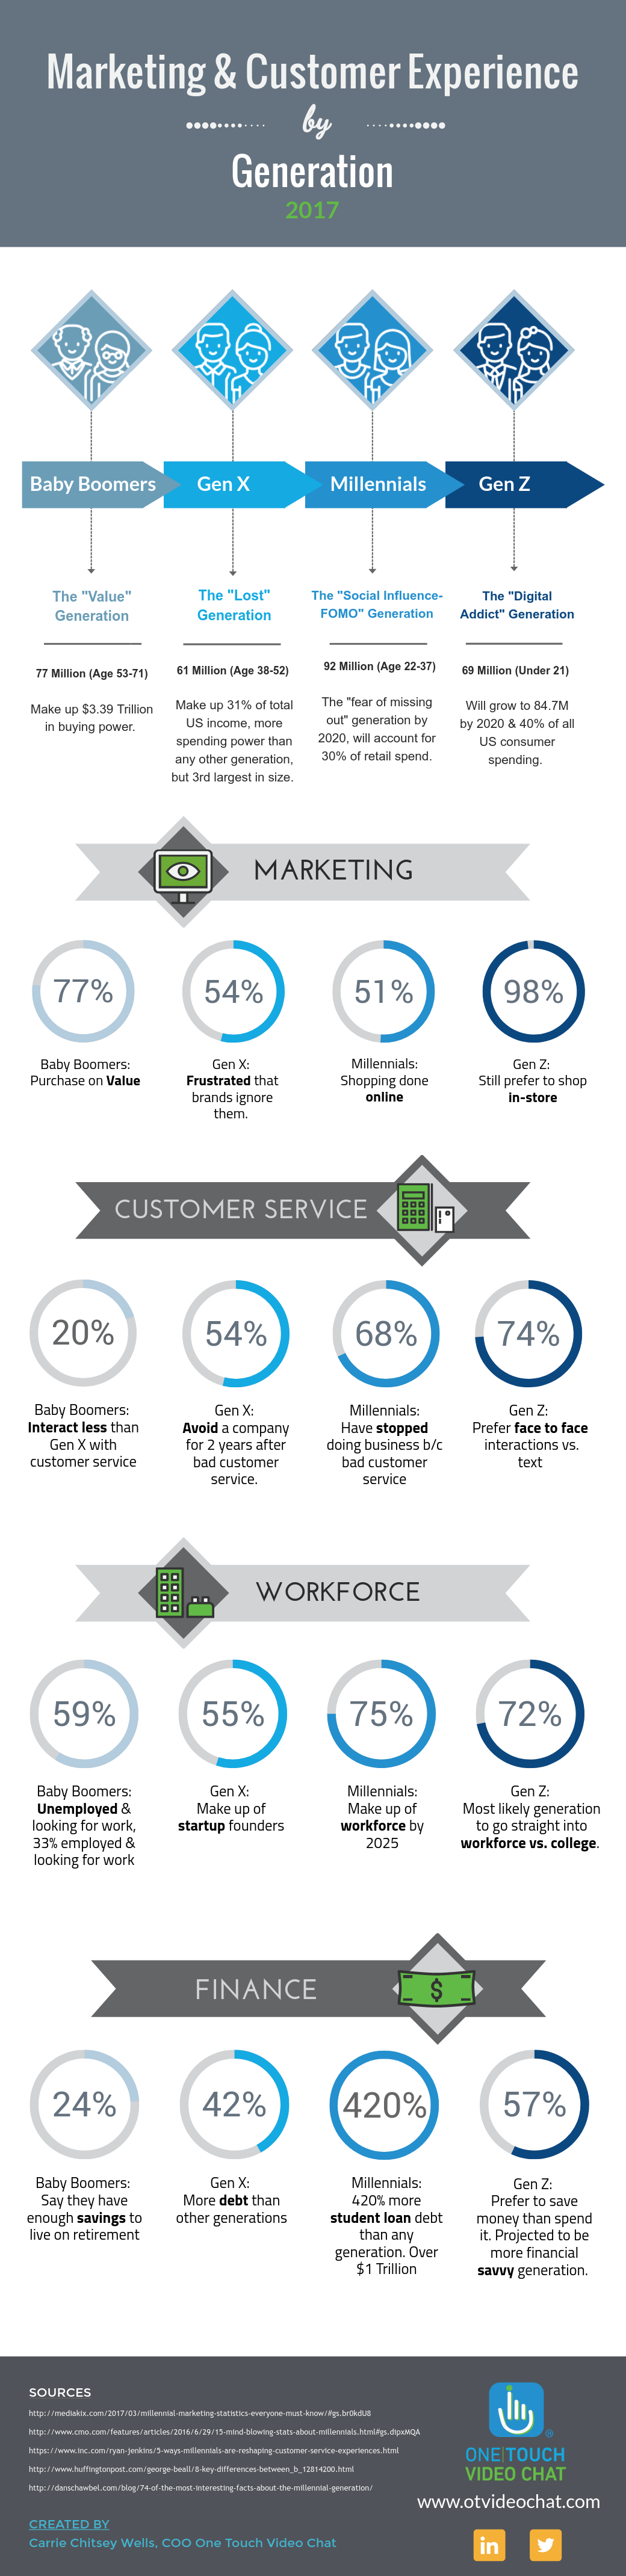 Marketing & Customer Experience by Generation Infographic